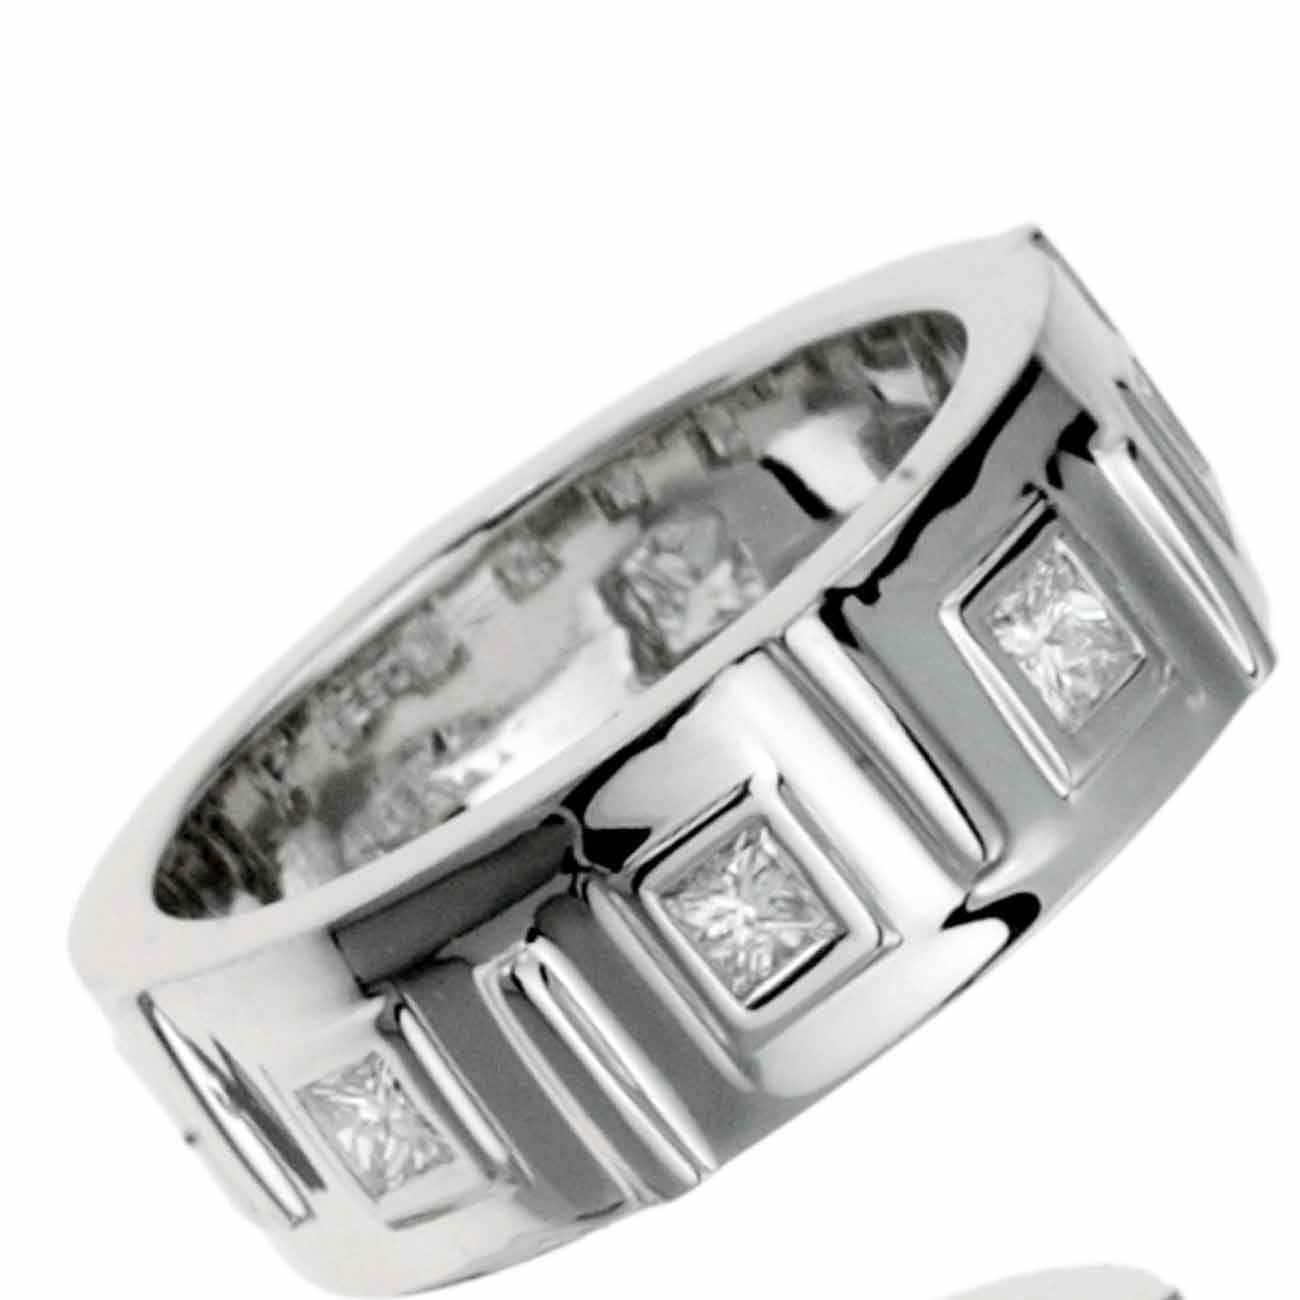 CHRIS AIRE DIAMOND WEDDING BAND - Chris Aire Fine Jewelry & Timepieces